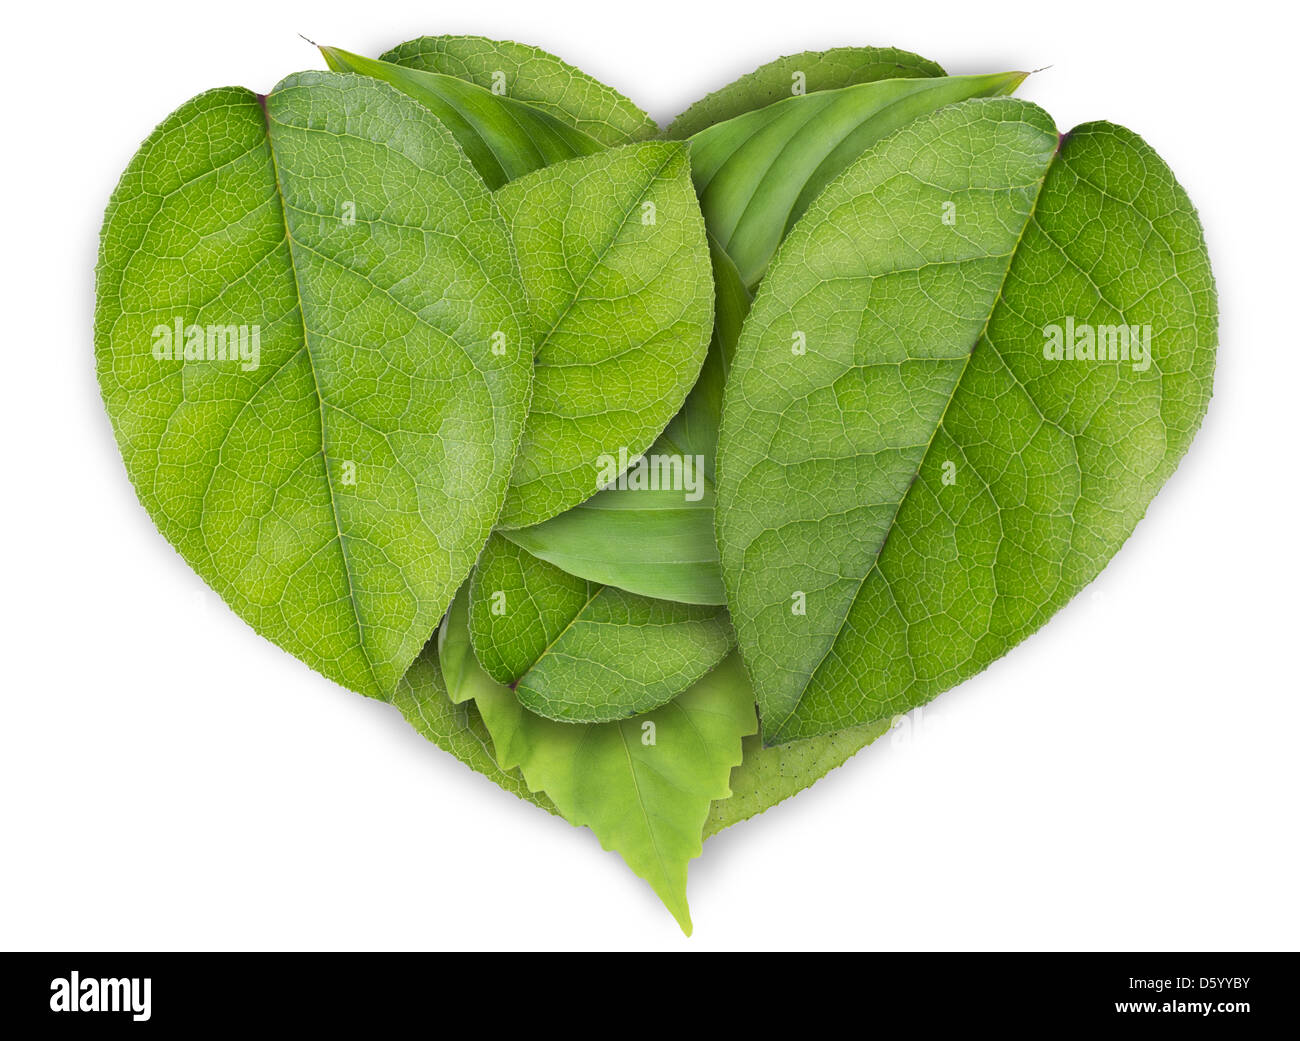 Heart made of green mint leaves on white background Stock Photo - Alamy